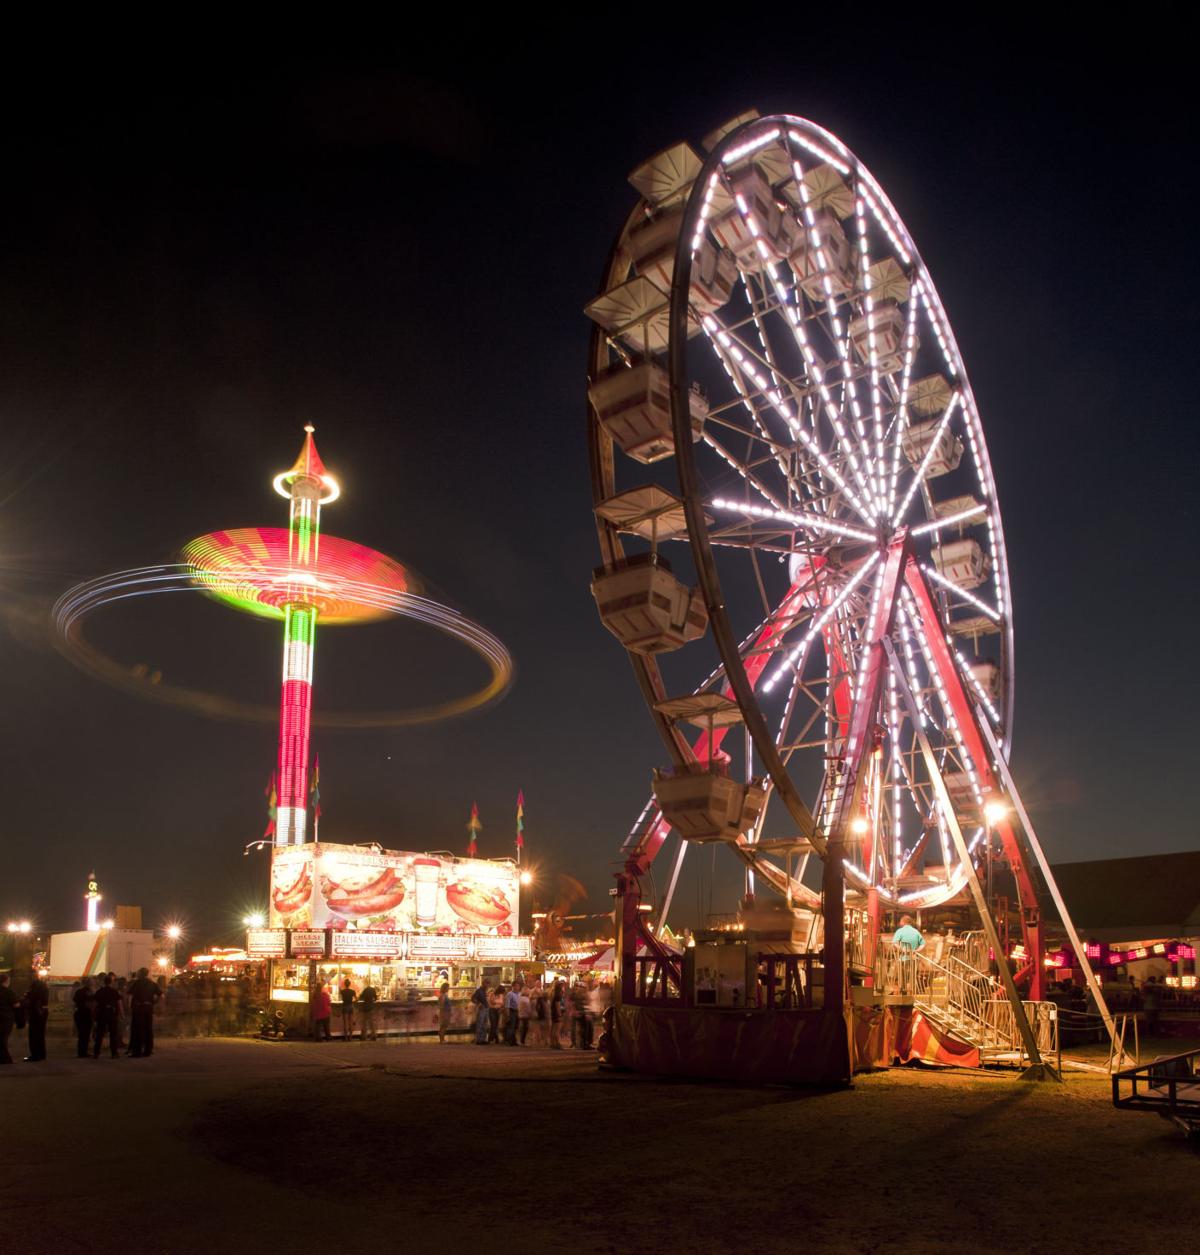 Dixie Classic Fair confident in ride safety Local News